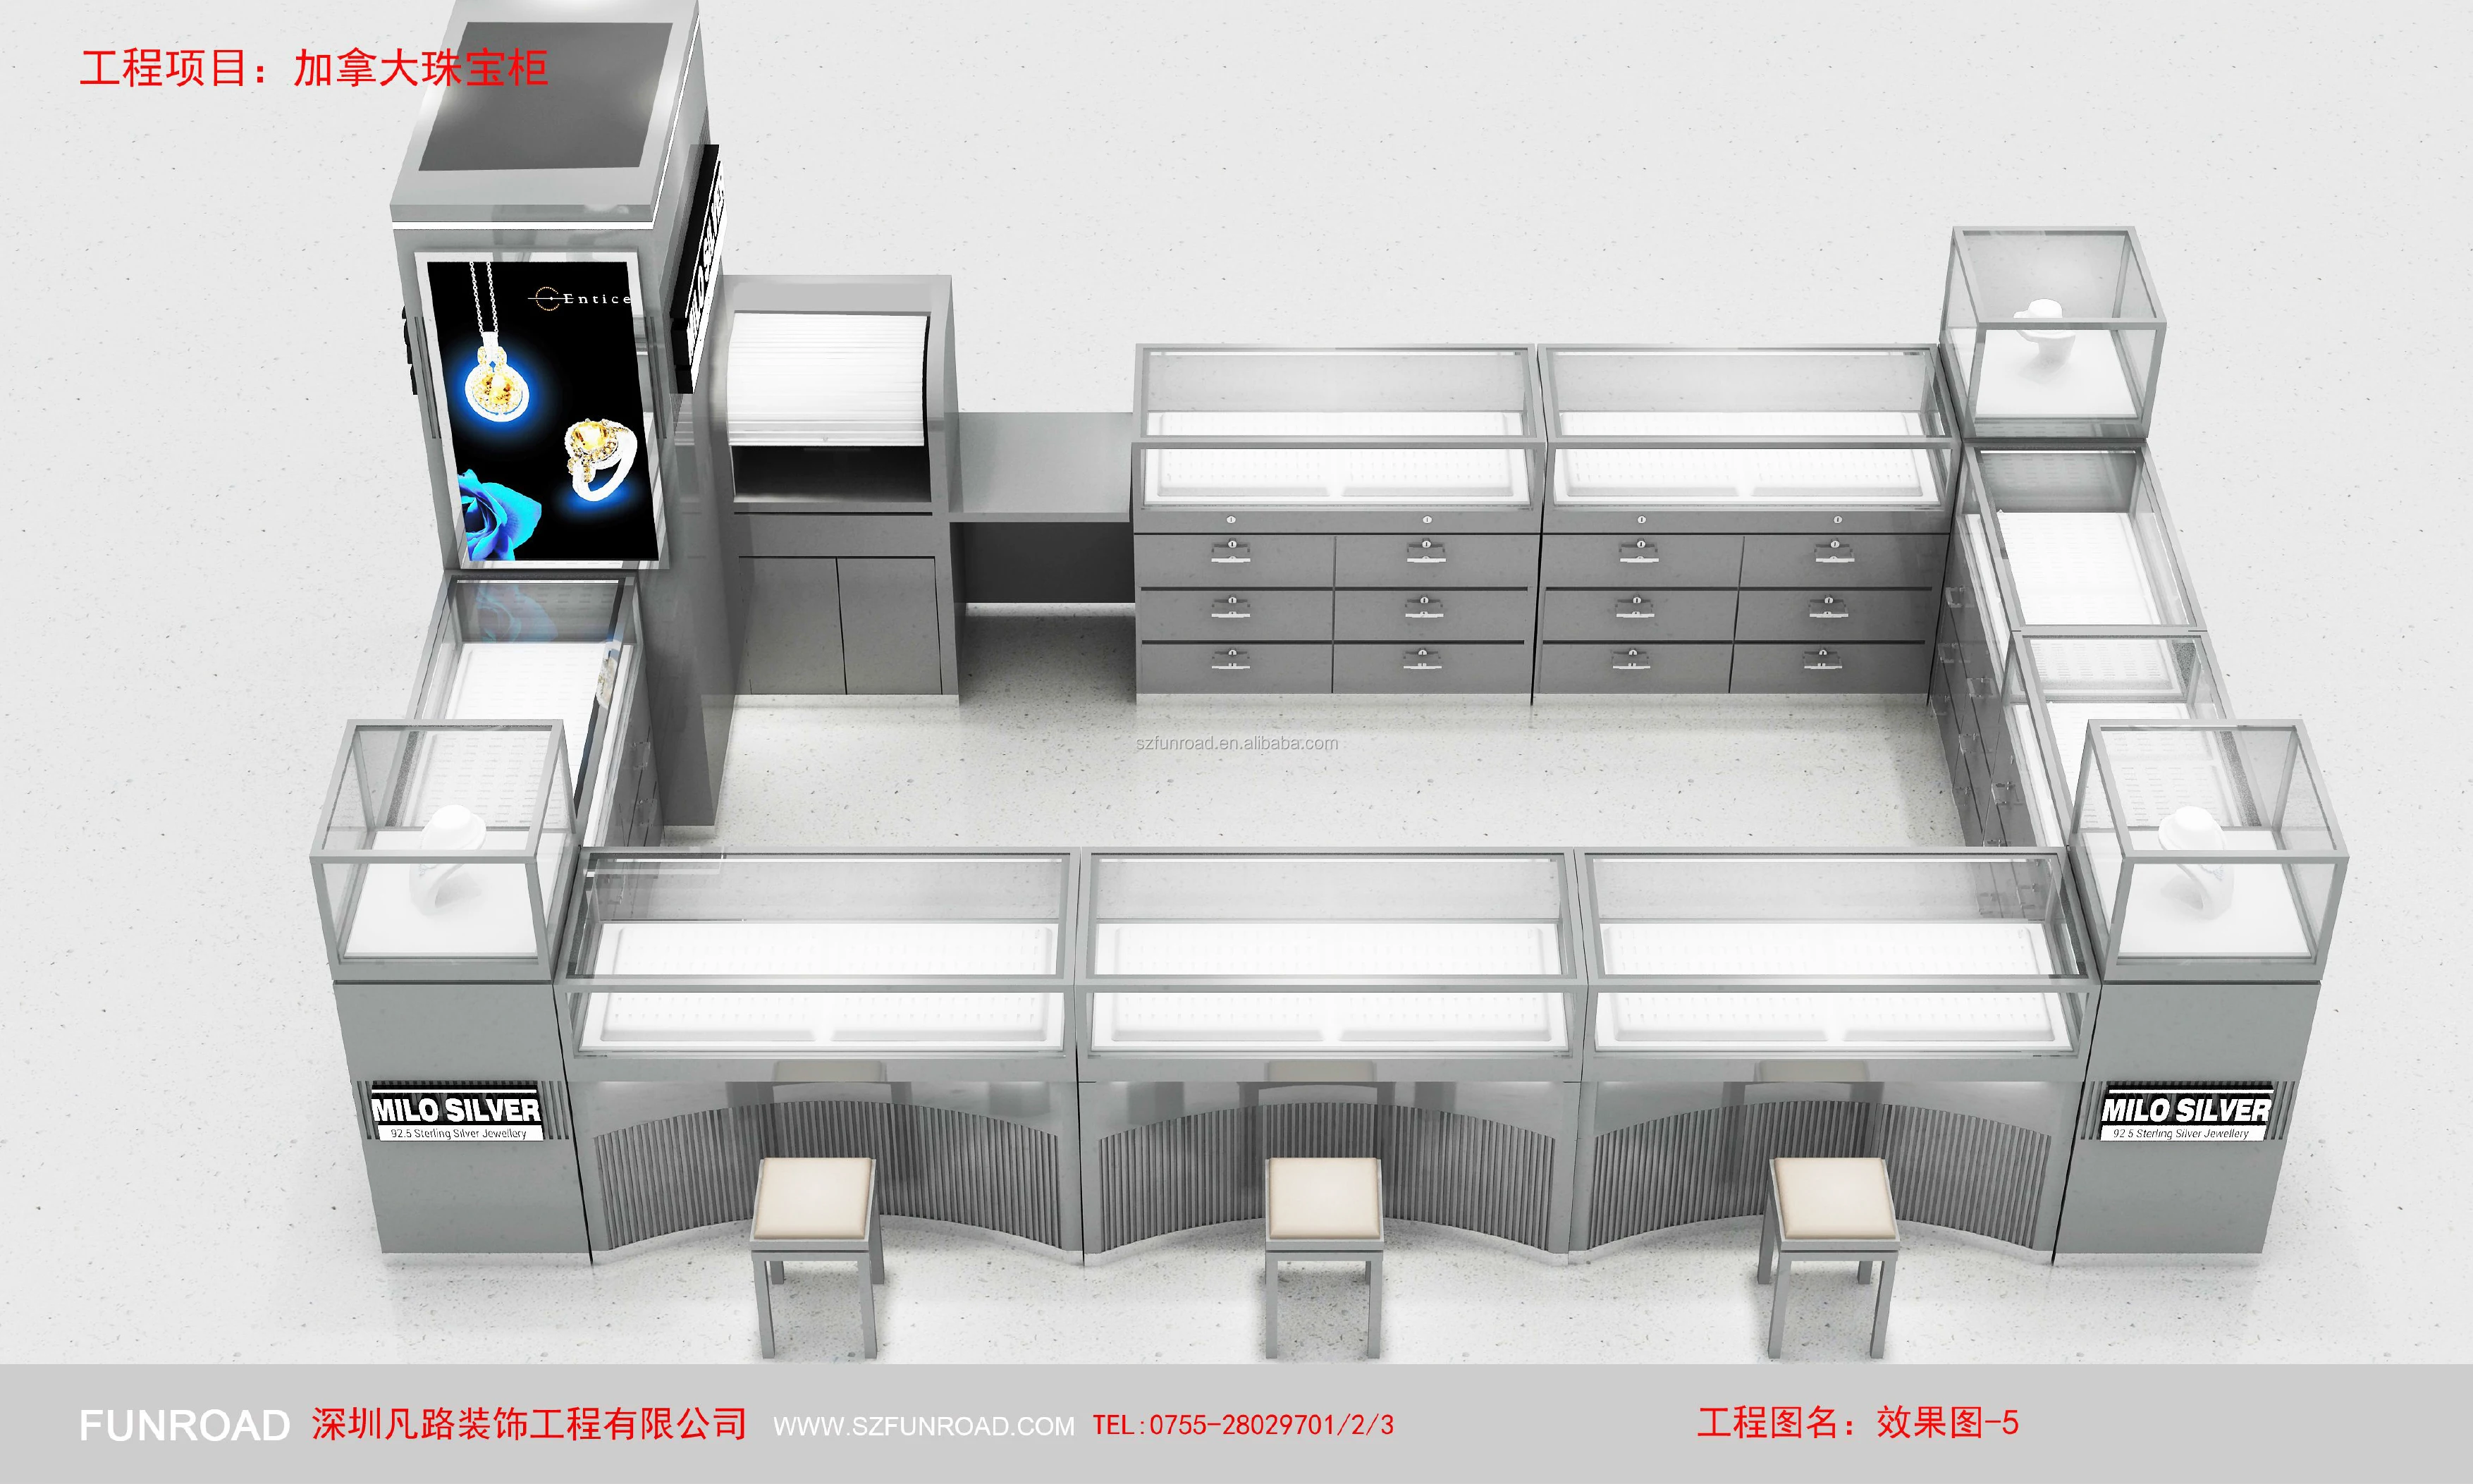 High End MDF material jewelry kiosk / showcase / counter design for jewelry handbag watch display